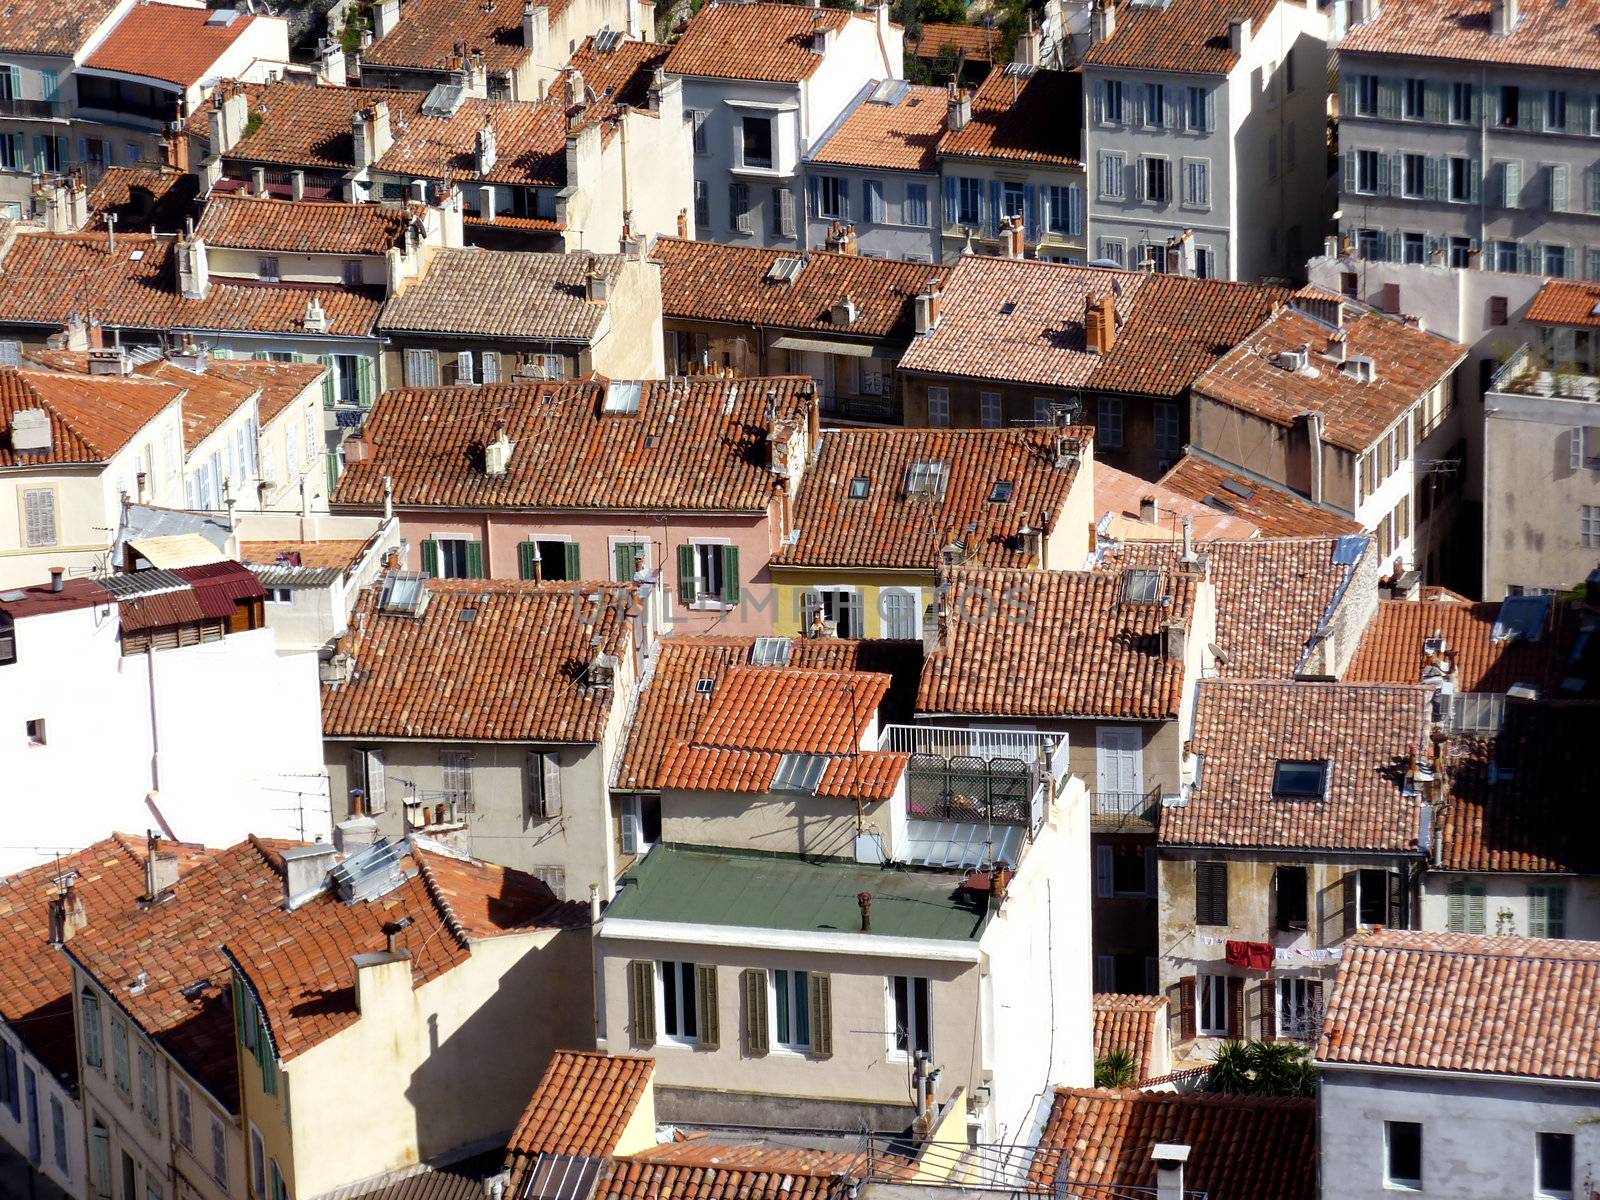 Roofs at Marseilles, France by Elenaphotos21